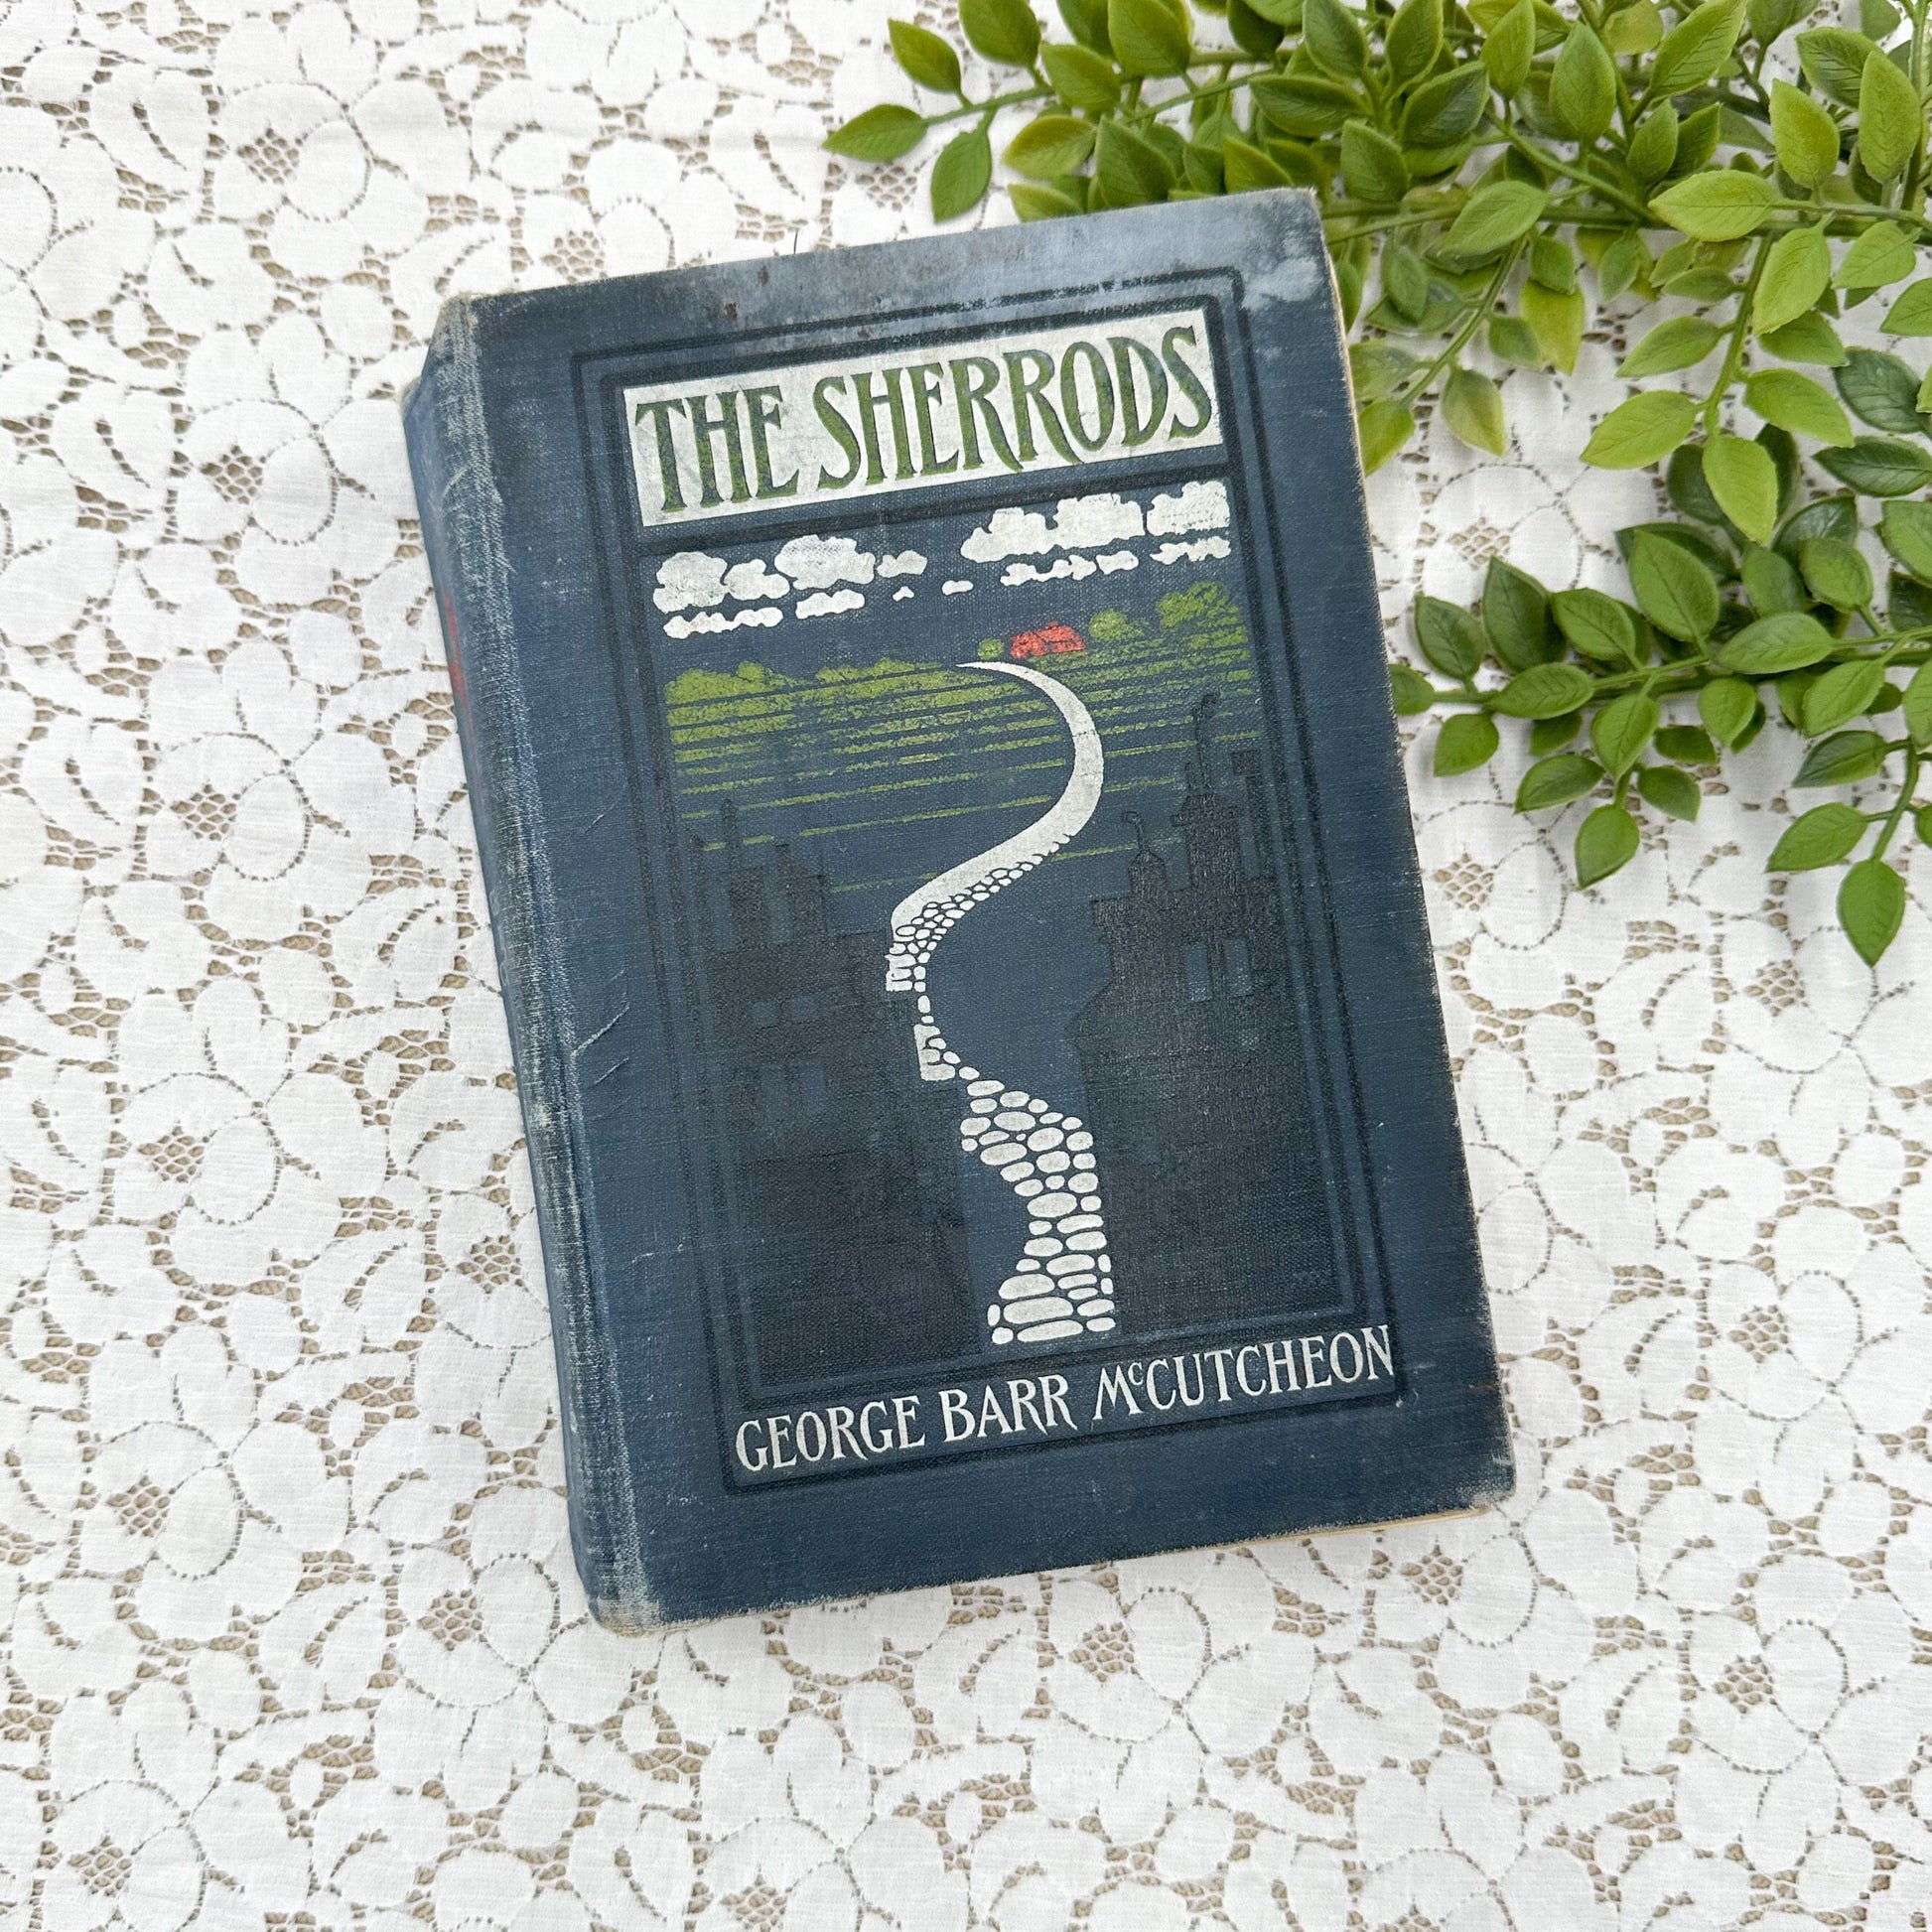 The Sherrods by George Barr McCutcheon, Decorated cover by Margaret Armstrong